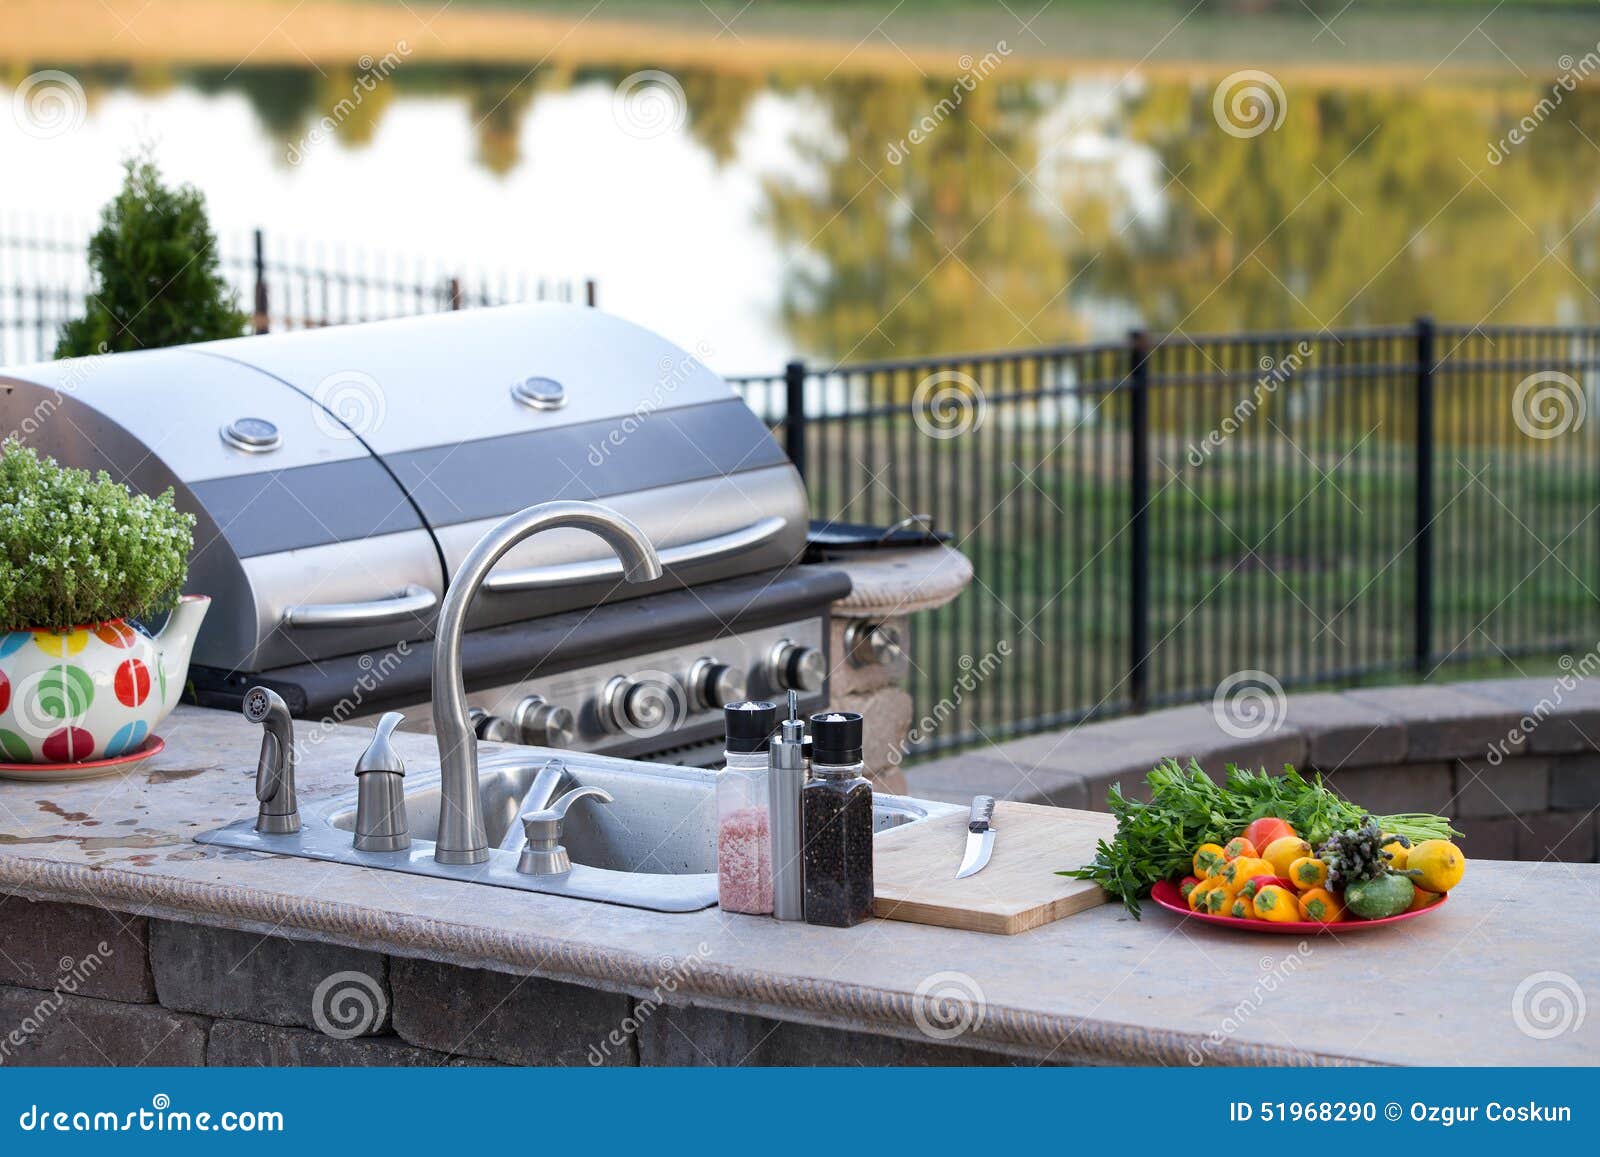 preparing a healthy meal in an outdoor kitchen